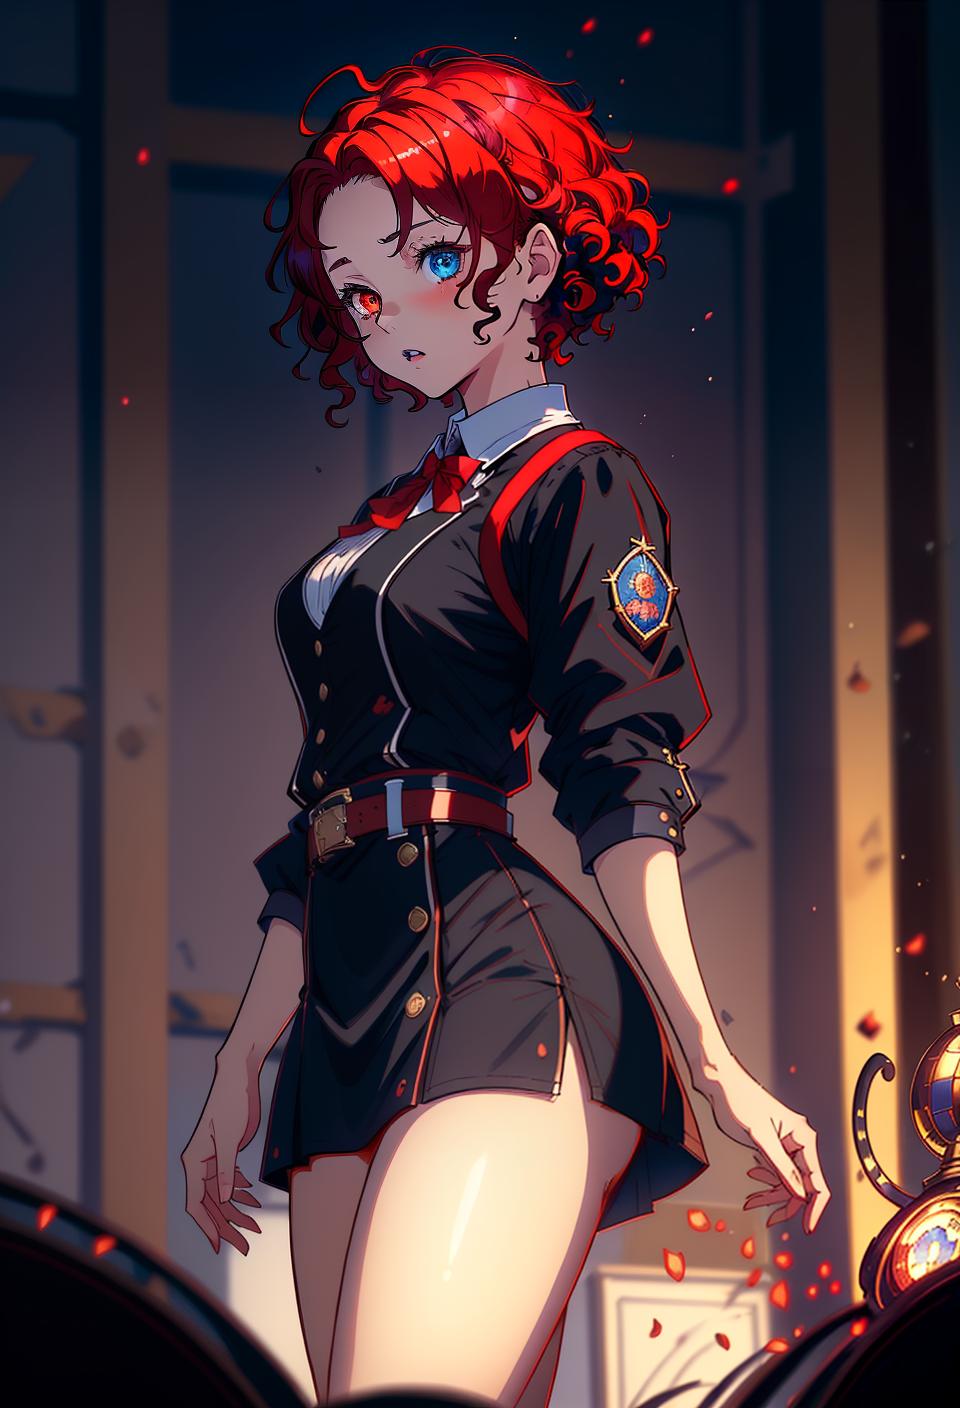  ((trending, highres, masterpiece, cinematic shot)), 1girl, chibi, female student uniform, medieval fantasy scene, short curly red hair, hair covering one eye, narrow heterochromia eyes, high class, elegant personality, scared expression, very dark skin, magical, lucky